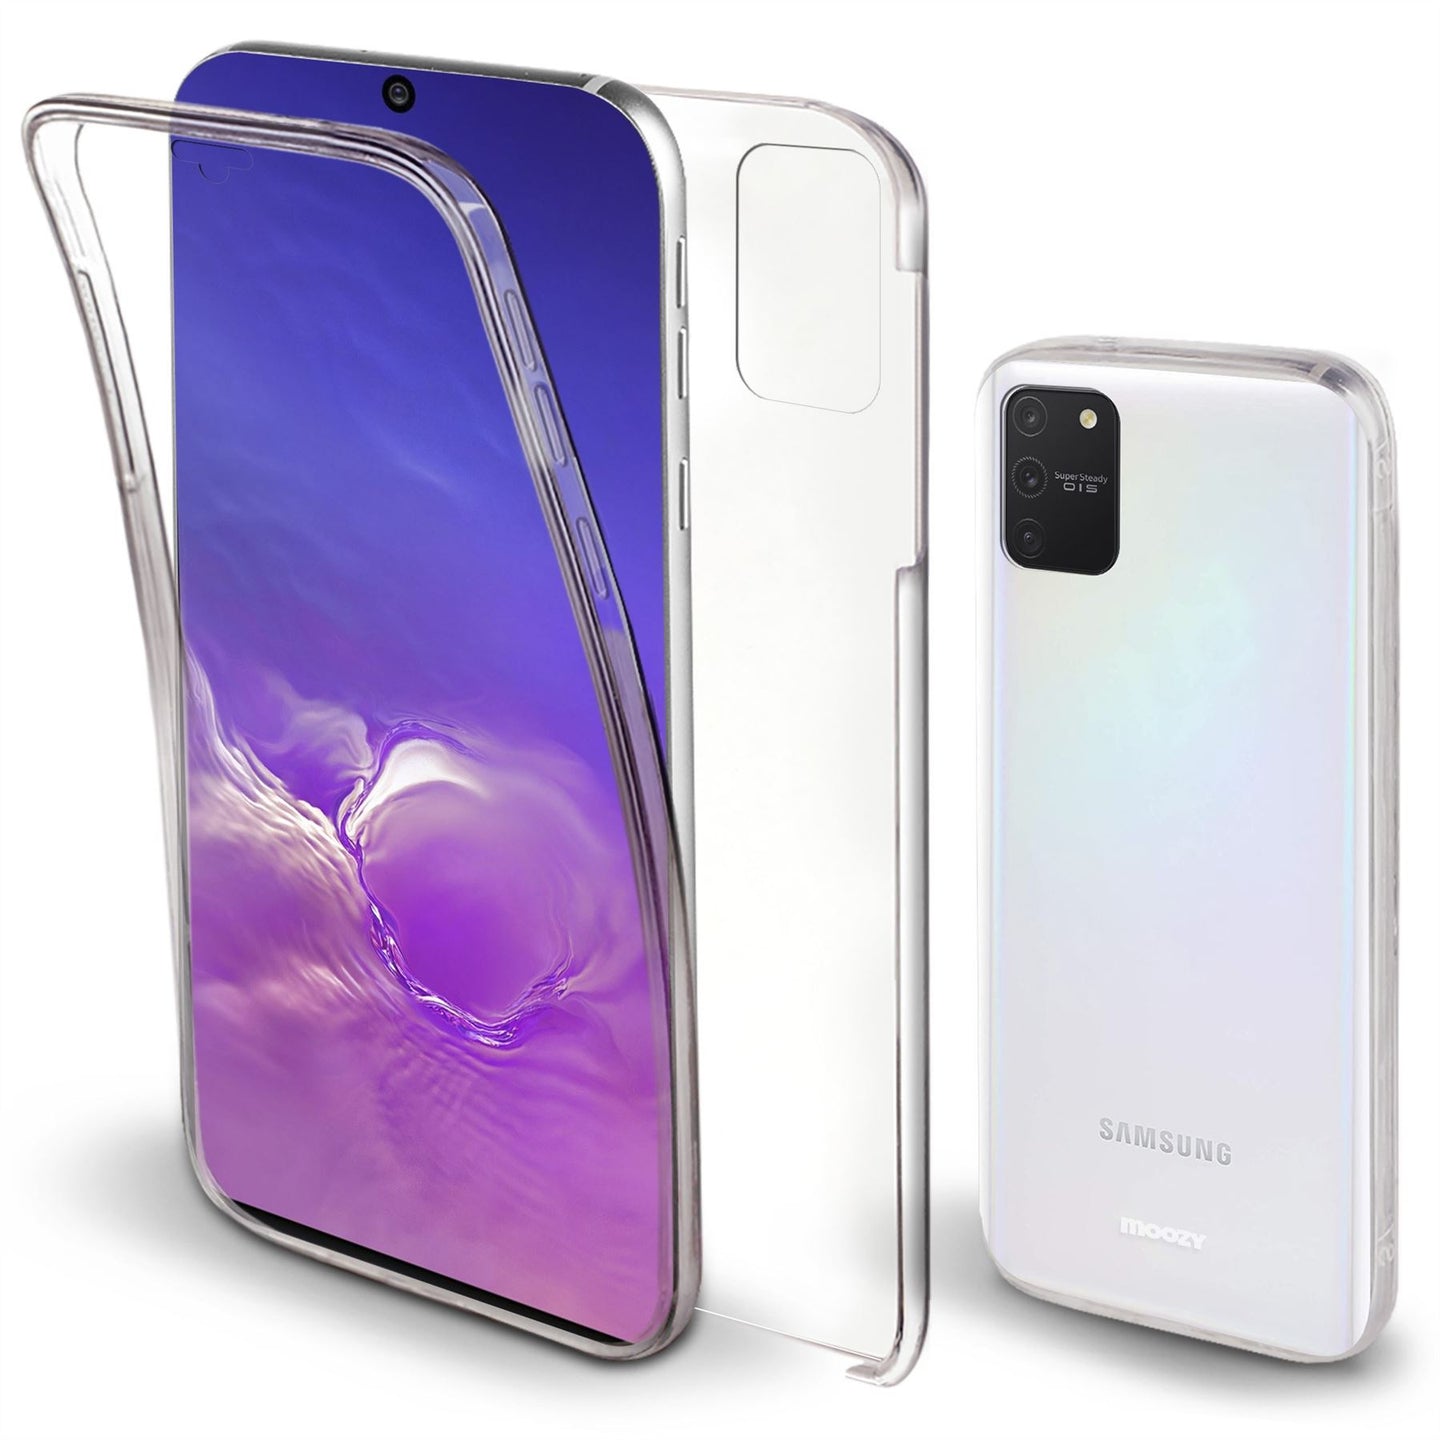 Moozy 360 Degree Case for Samsung S10 Lite - Transparent Full body Slim Cover - Hard PC Back and Soft TPU Silicone Front